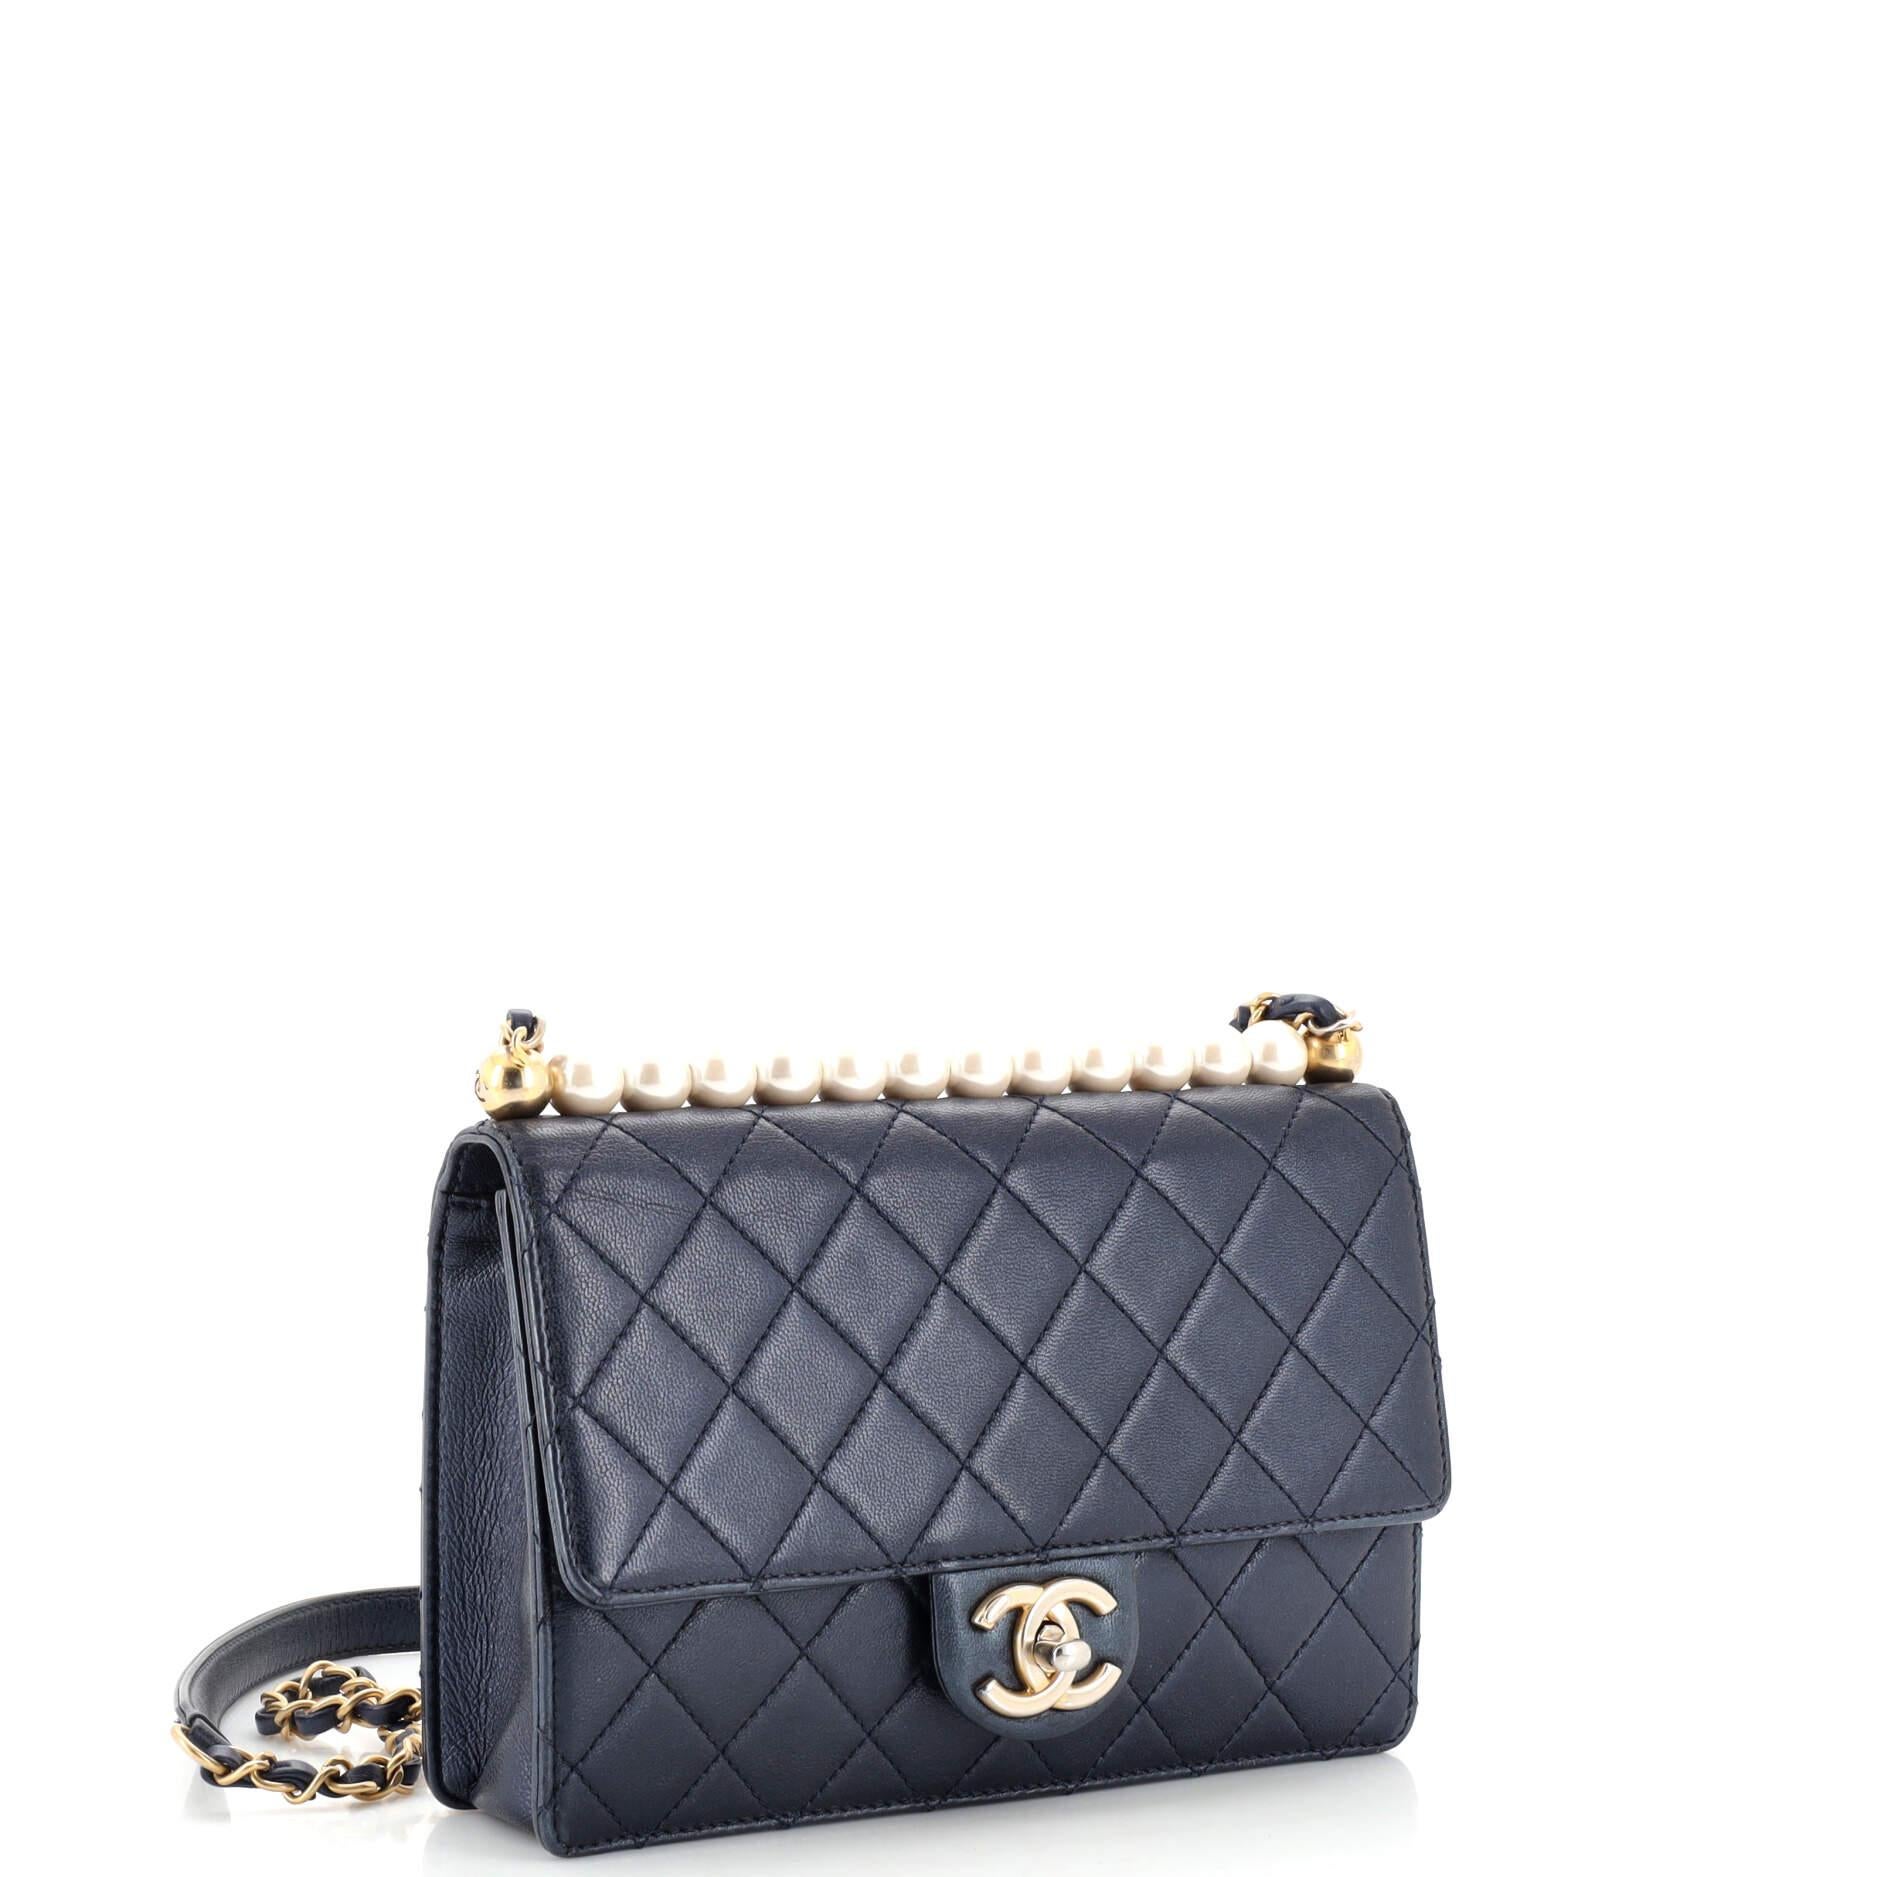 Chanel Model: Condition: Very good. CChic Pearls Flap Bag Quilted Lambskin Small In Good Condition For Sale In NY, NY